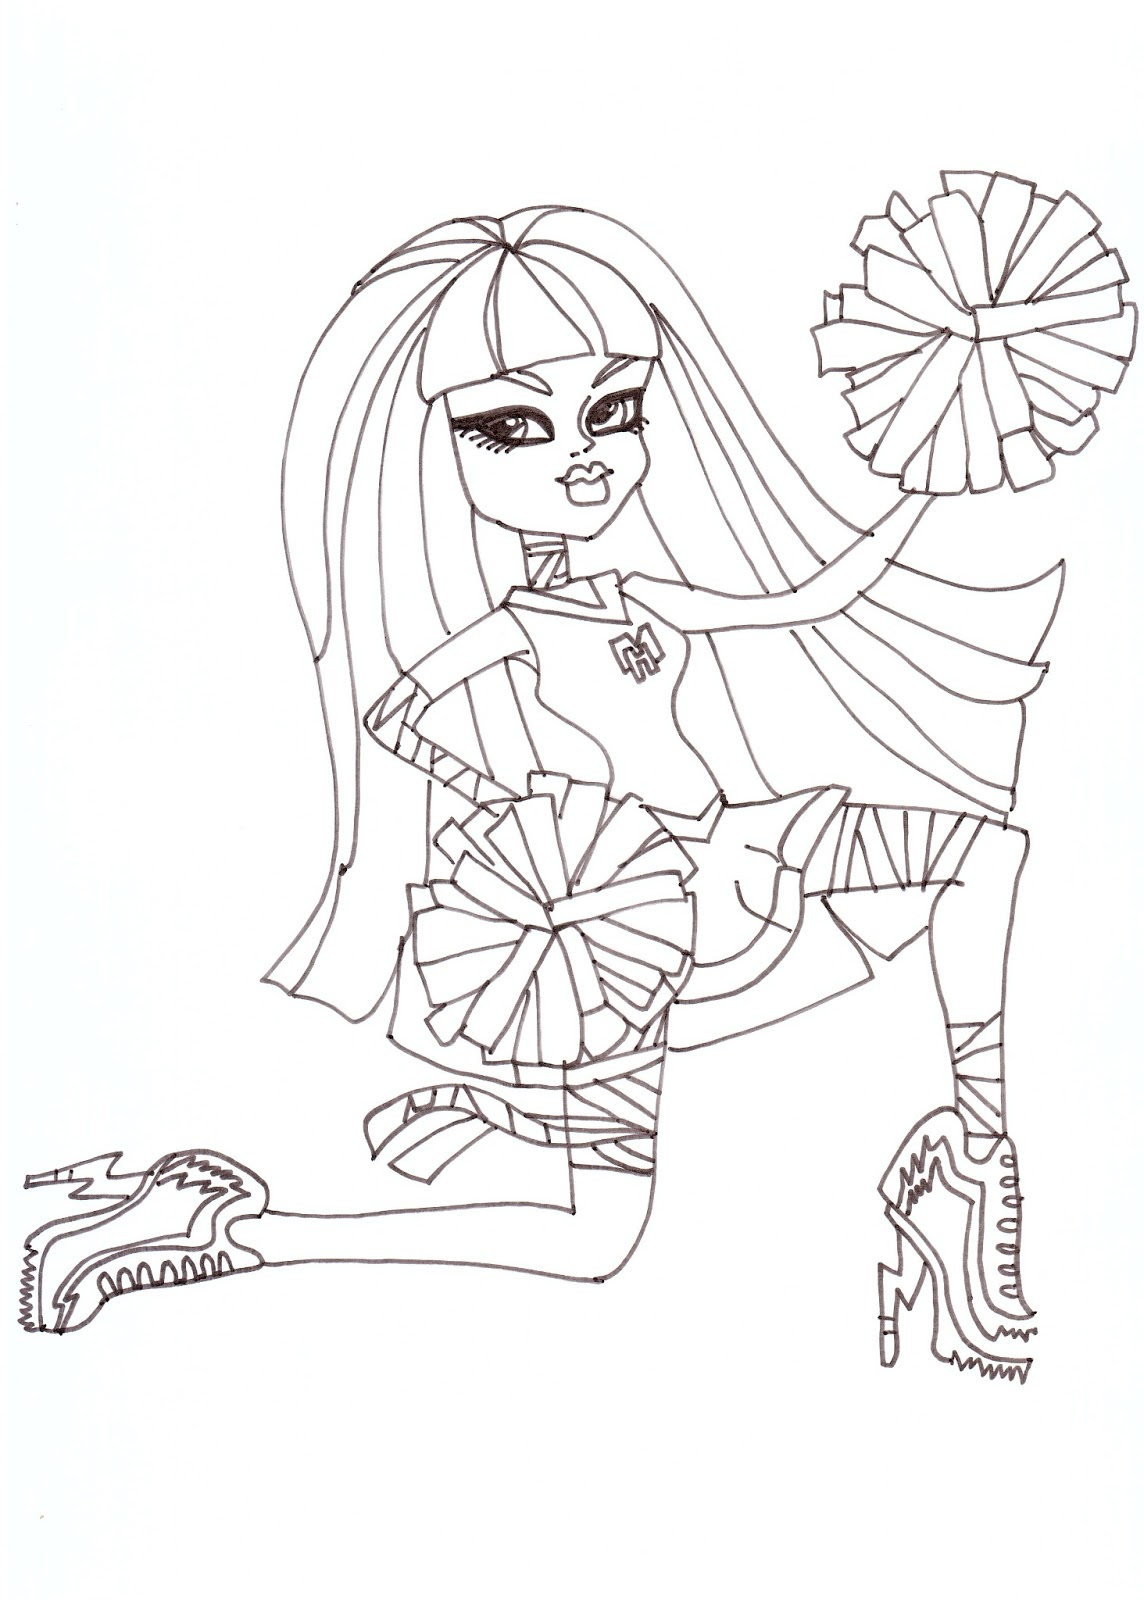 Download Free Printable Monster High Coloring Pages: Cleo De Nile Fearleading Coloring Sheet